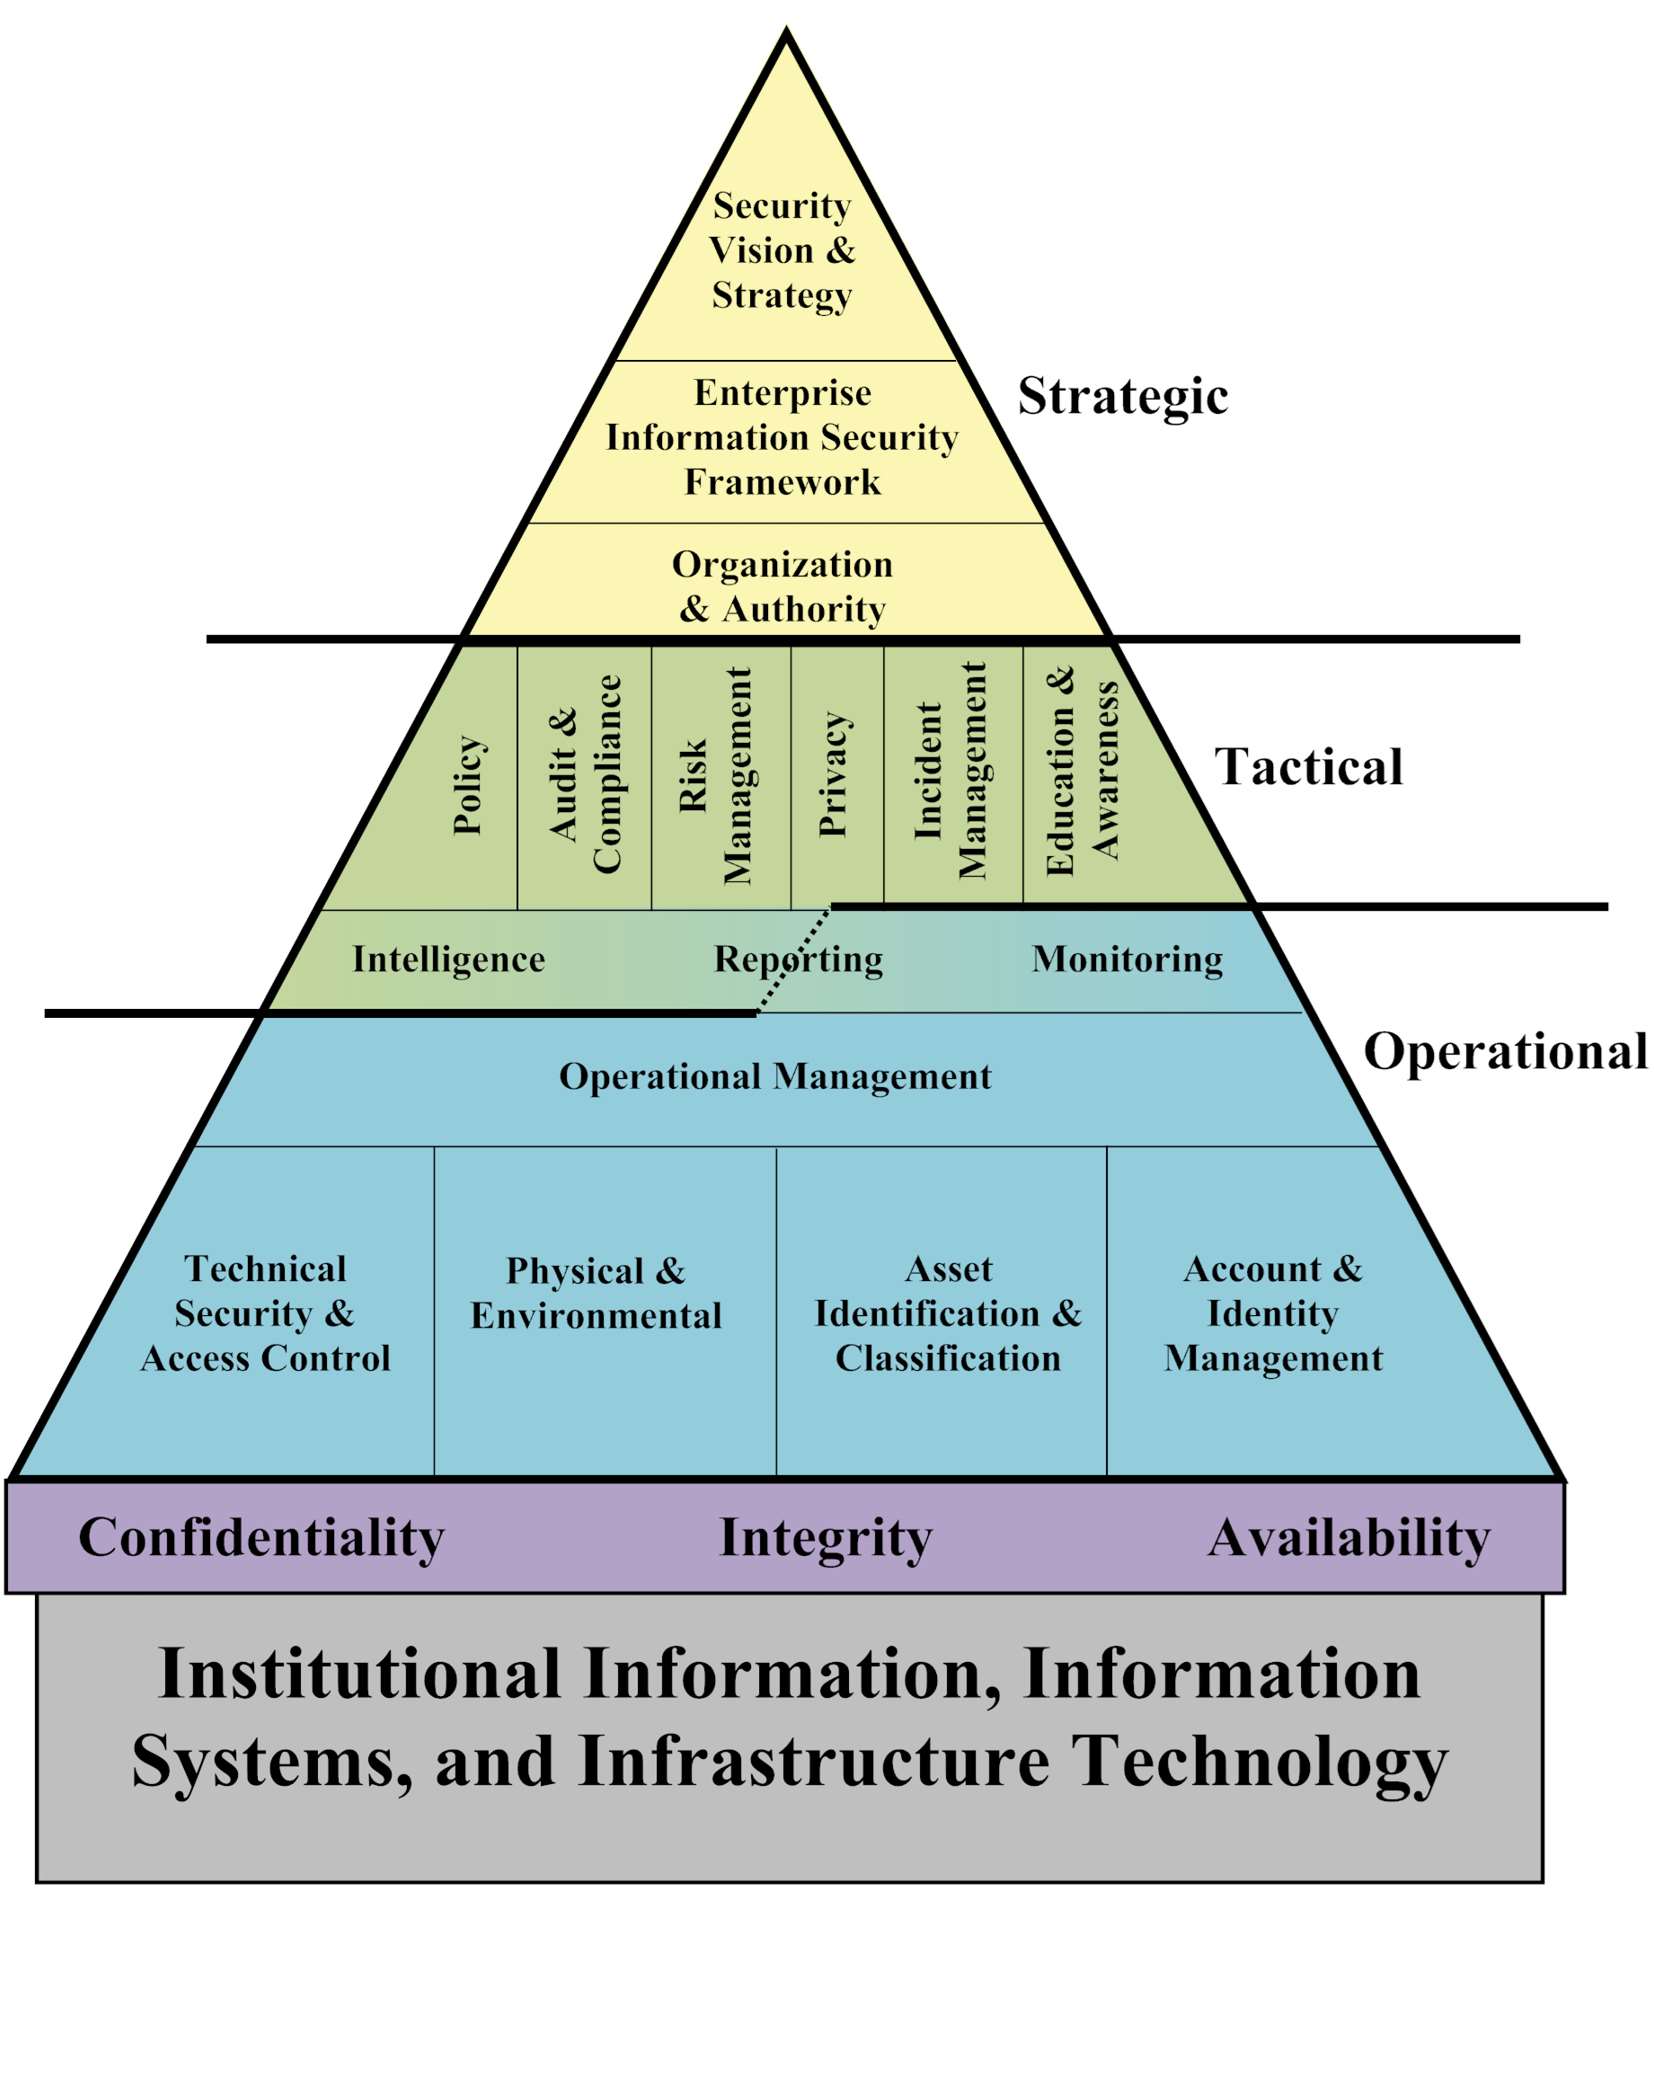 institutional information systems and infrastructure technology